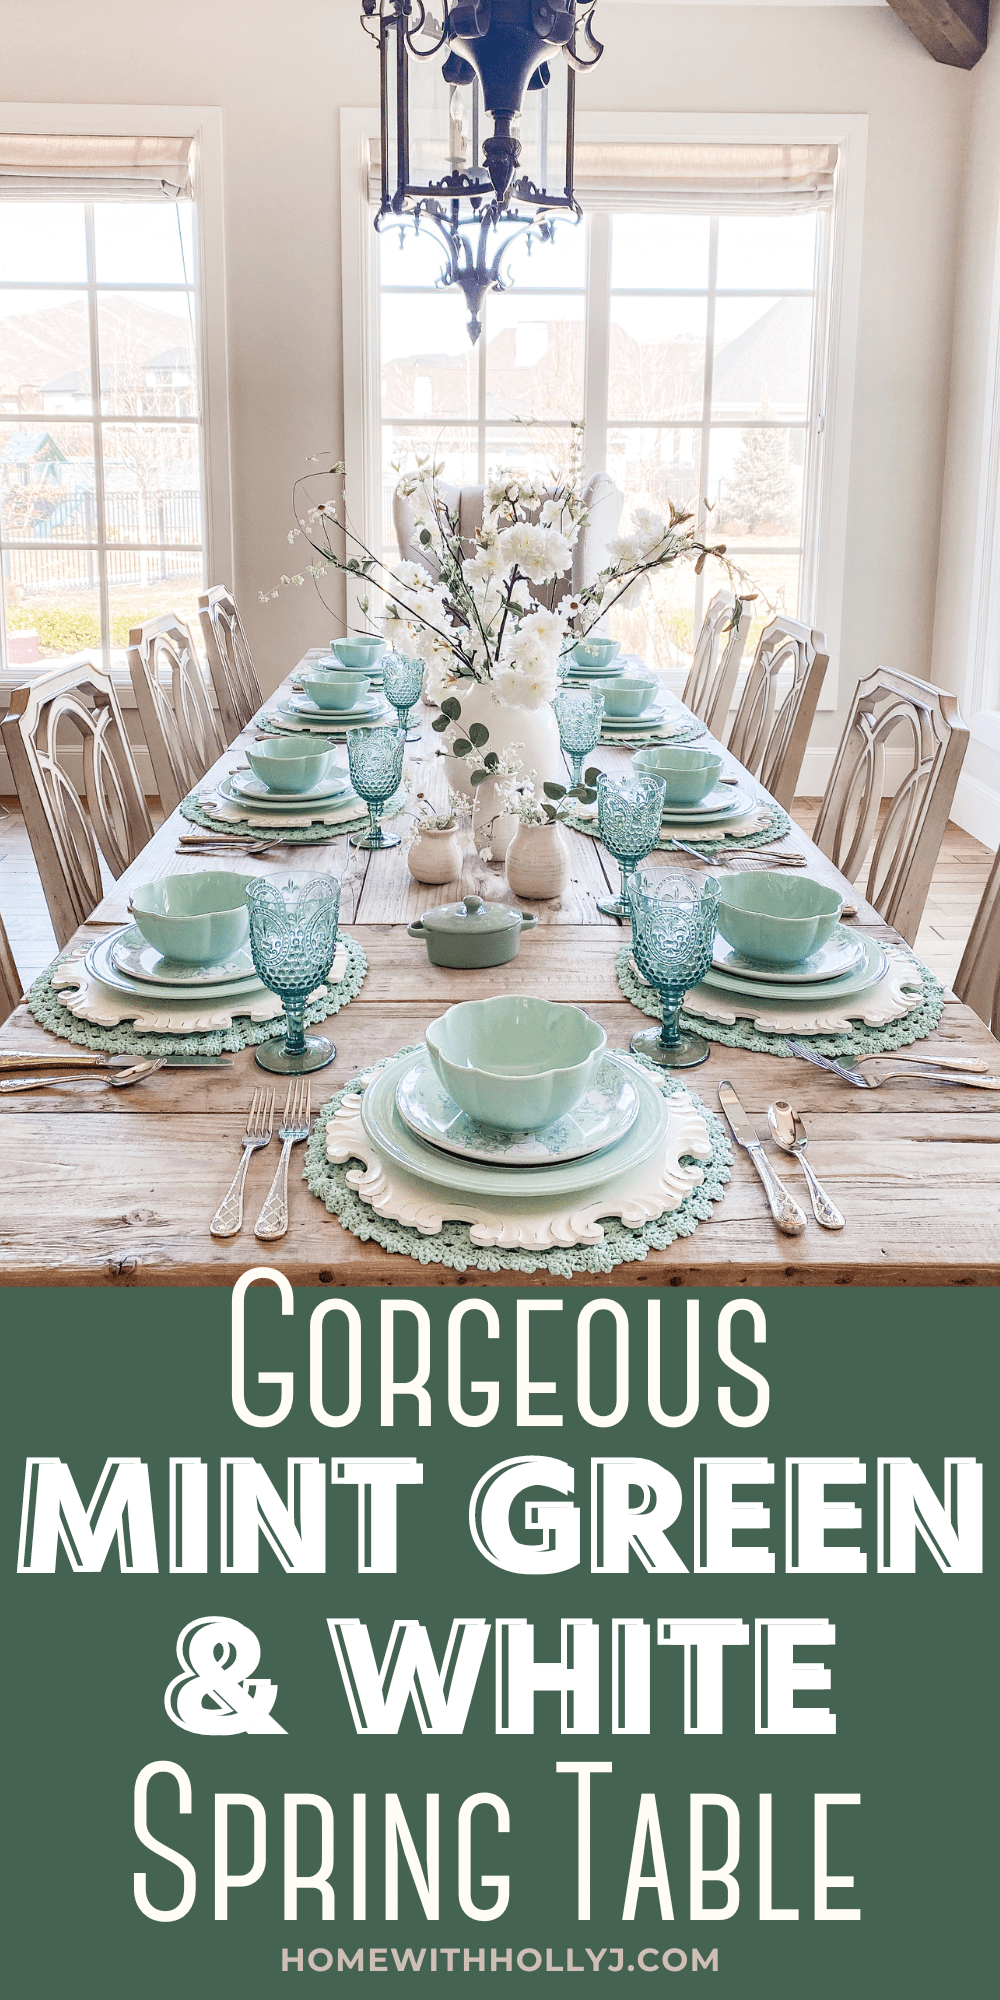 Find the perfect spring tablescape ideas to use this Easter and beyond for a beautiful presentation. Learn how here.